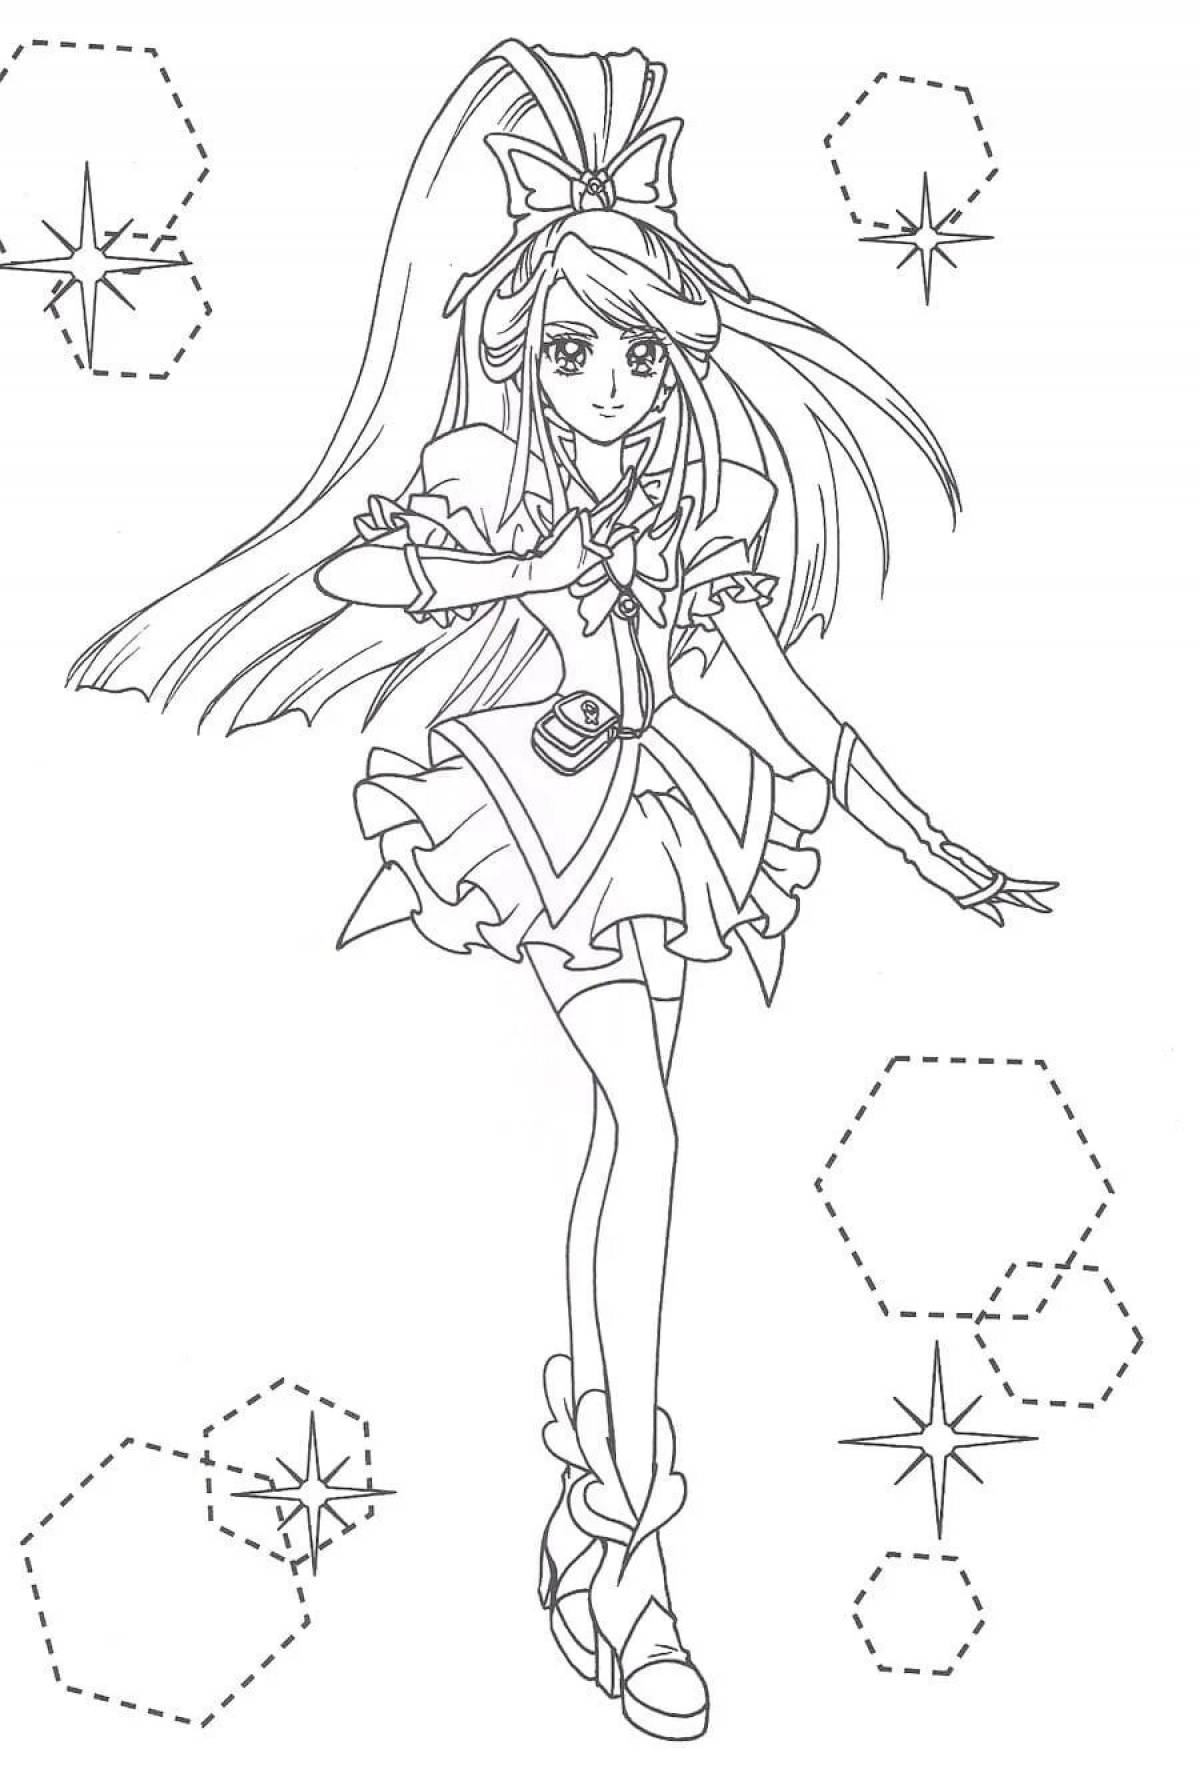 Dreamcore coloring page - shiny